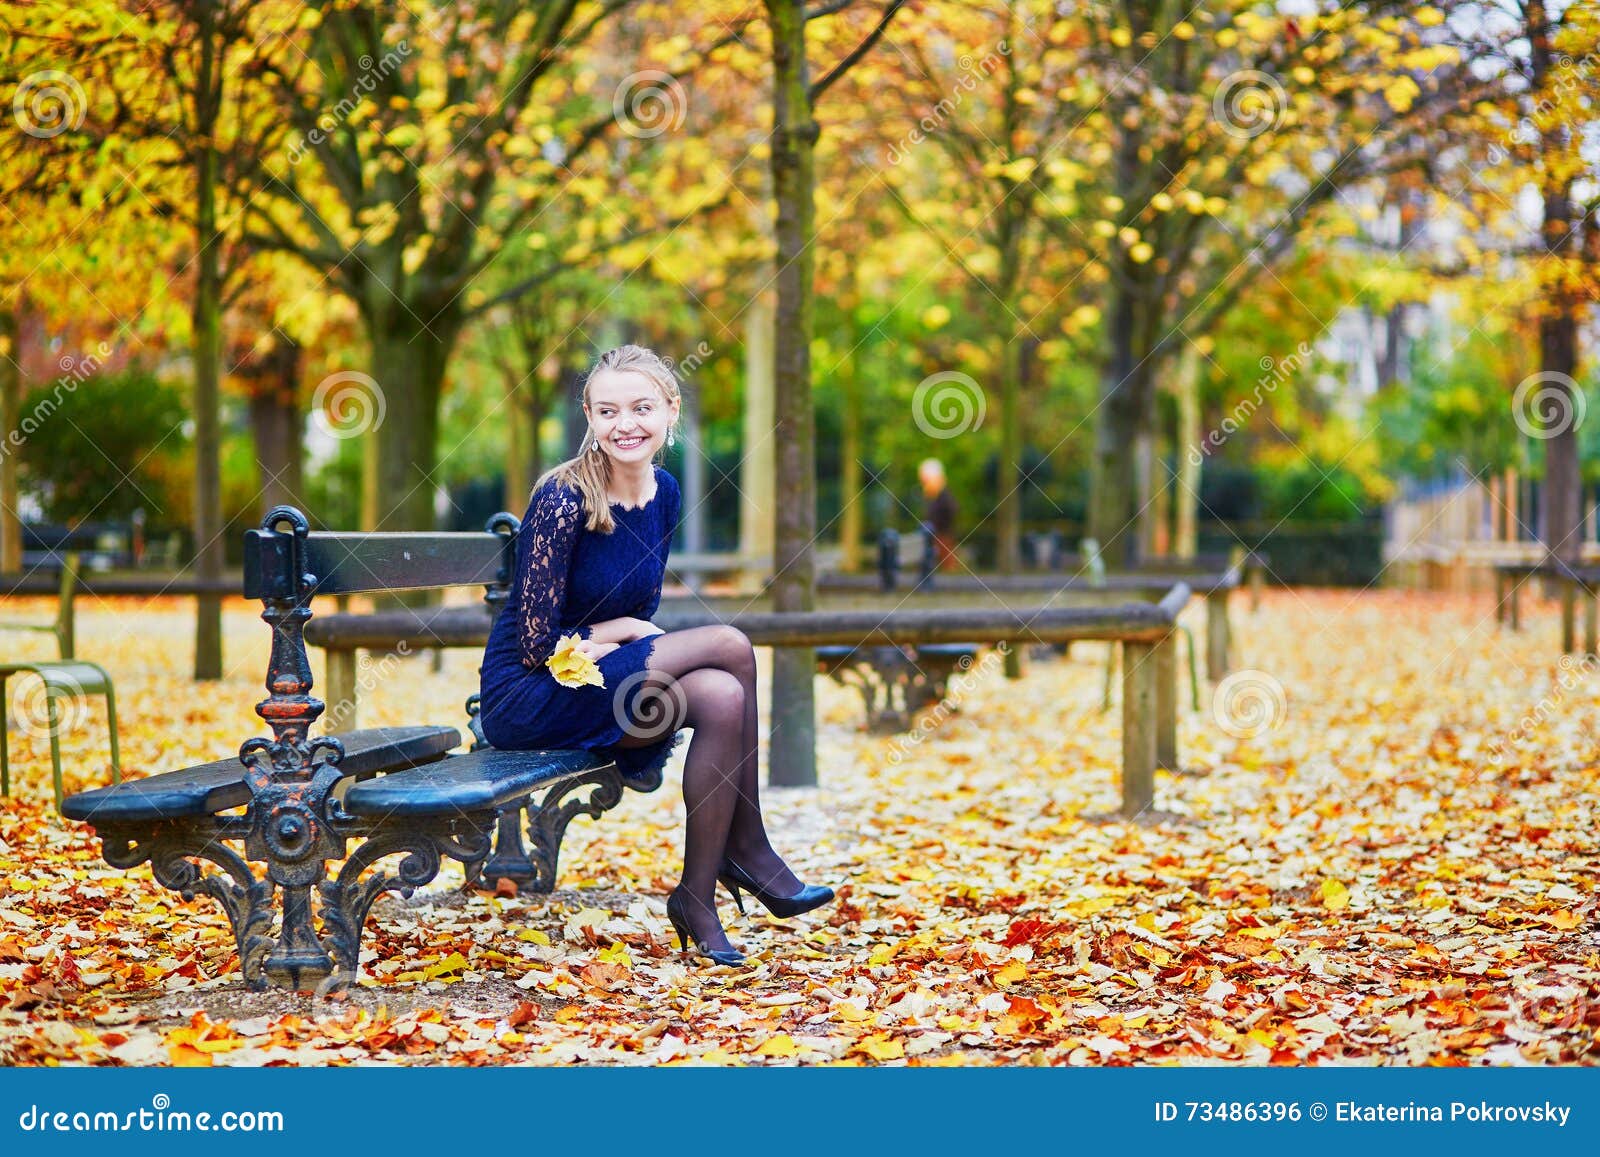 Beautiful Young Woman in the Luxembourg Garden of Paris on a Fall Day ...